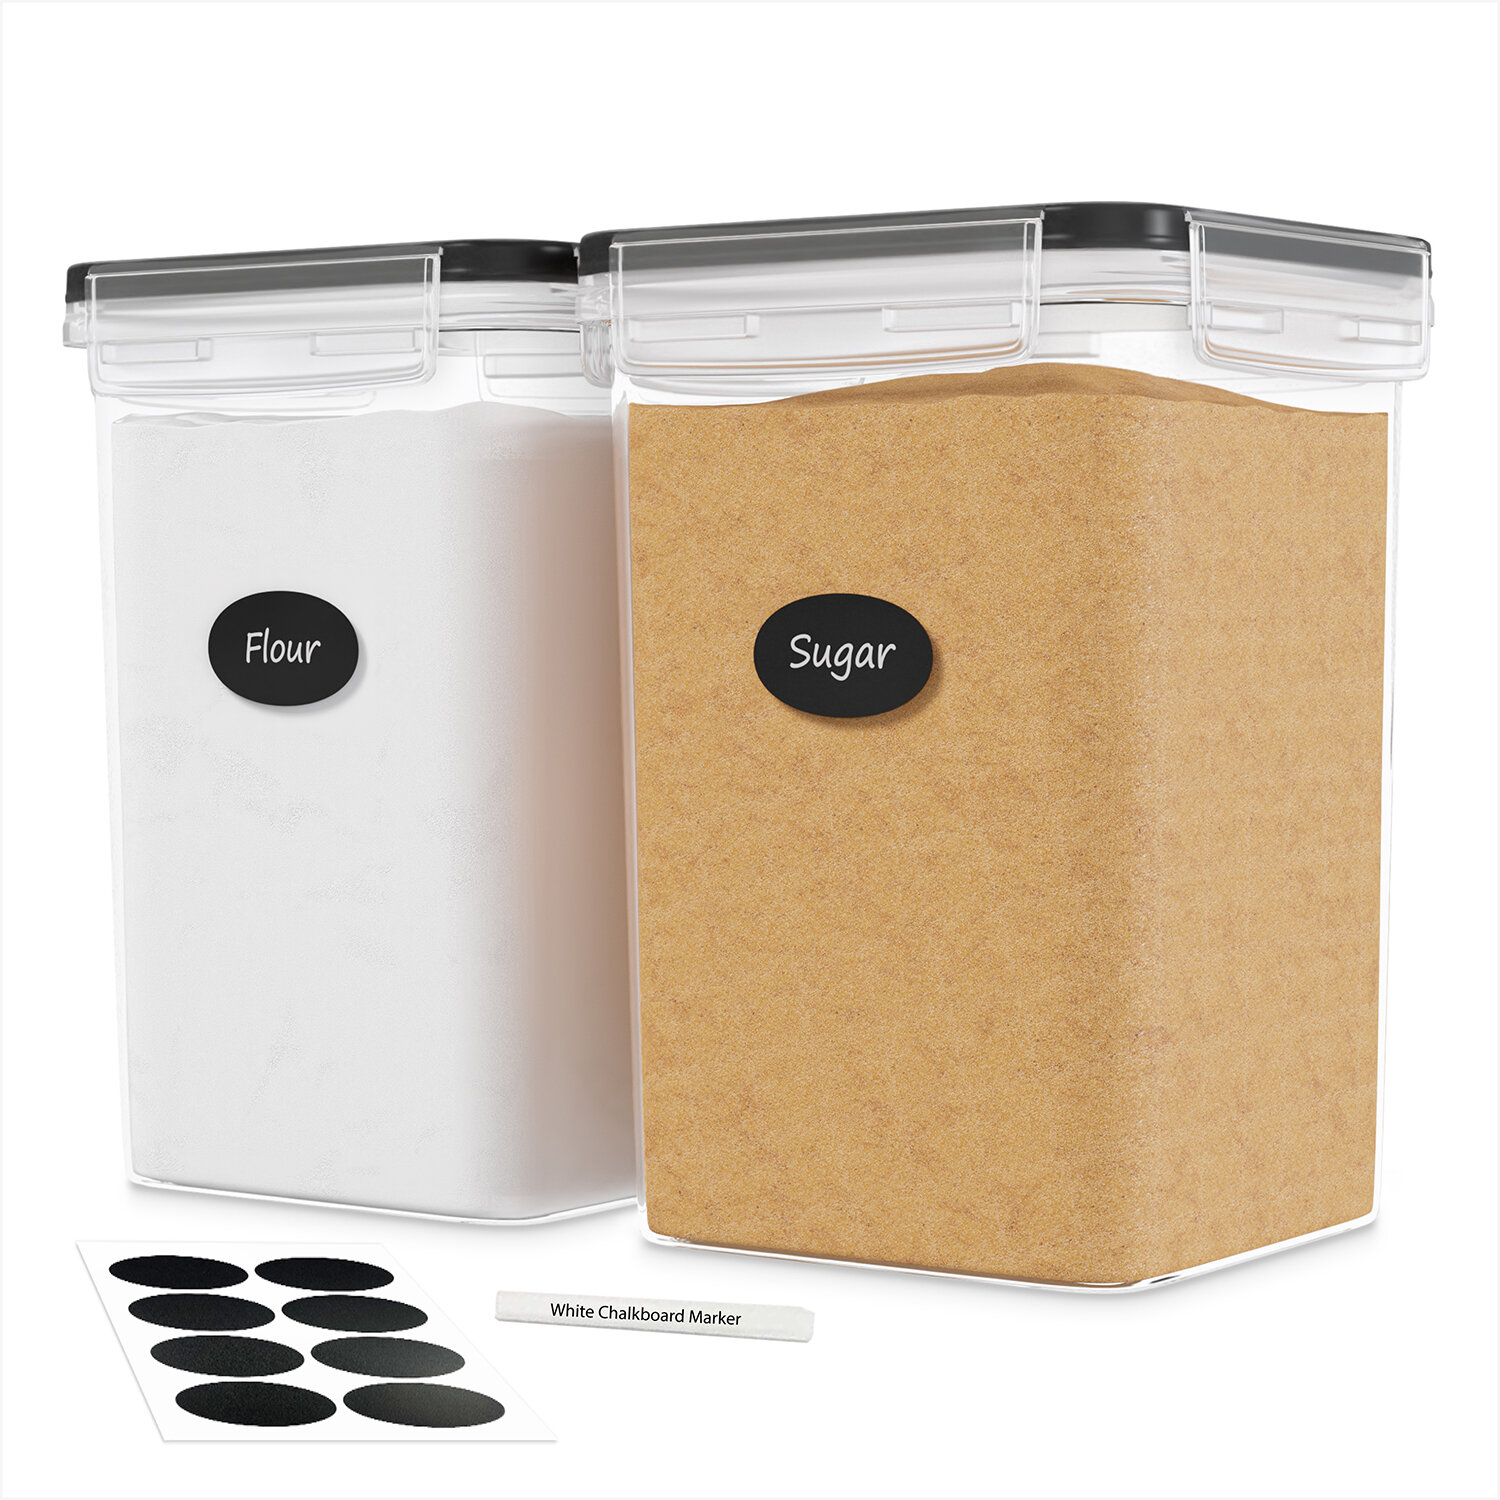 Pantry Value 32 oz. Plastic Deli Food Storage Containers with Airtight Lids  [24 Sets]